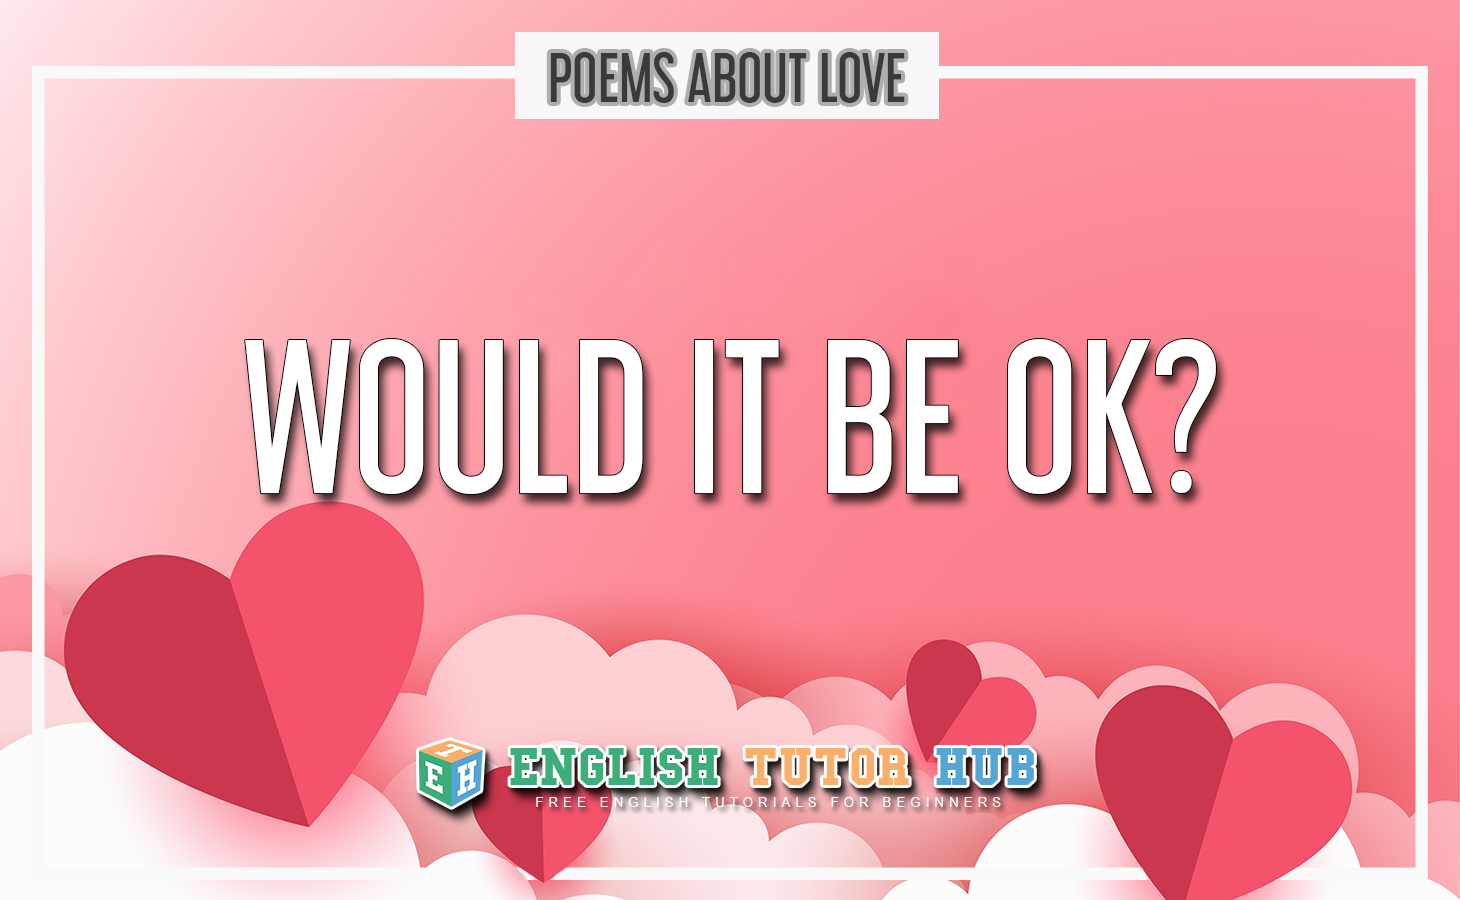 Would It Be Ok? - Summary and Lesson of Poems About Love [2022]